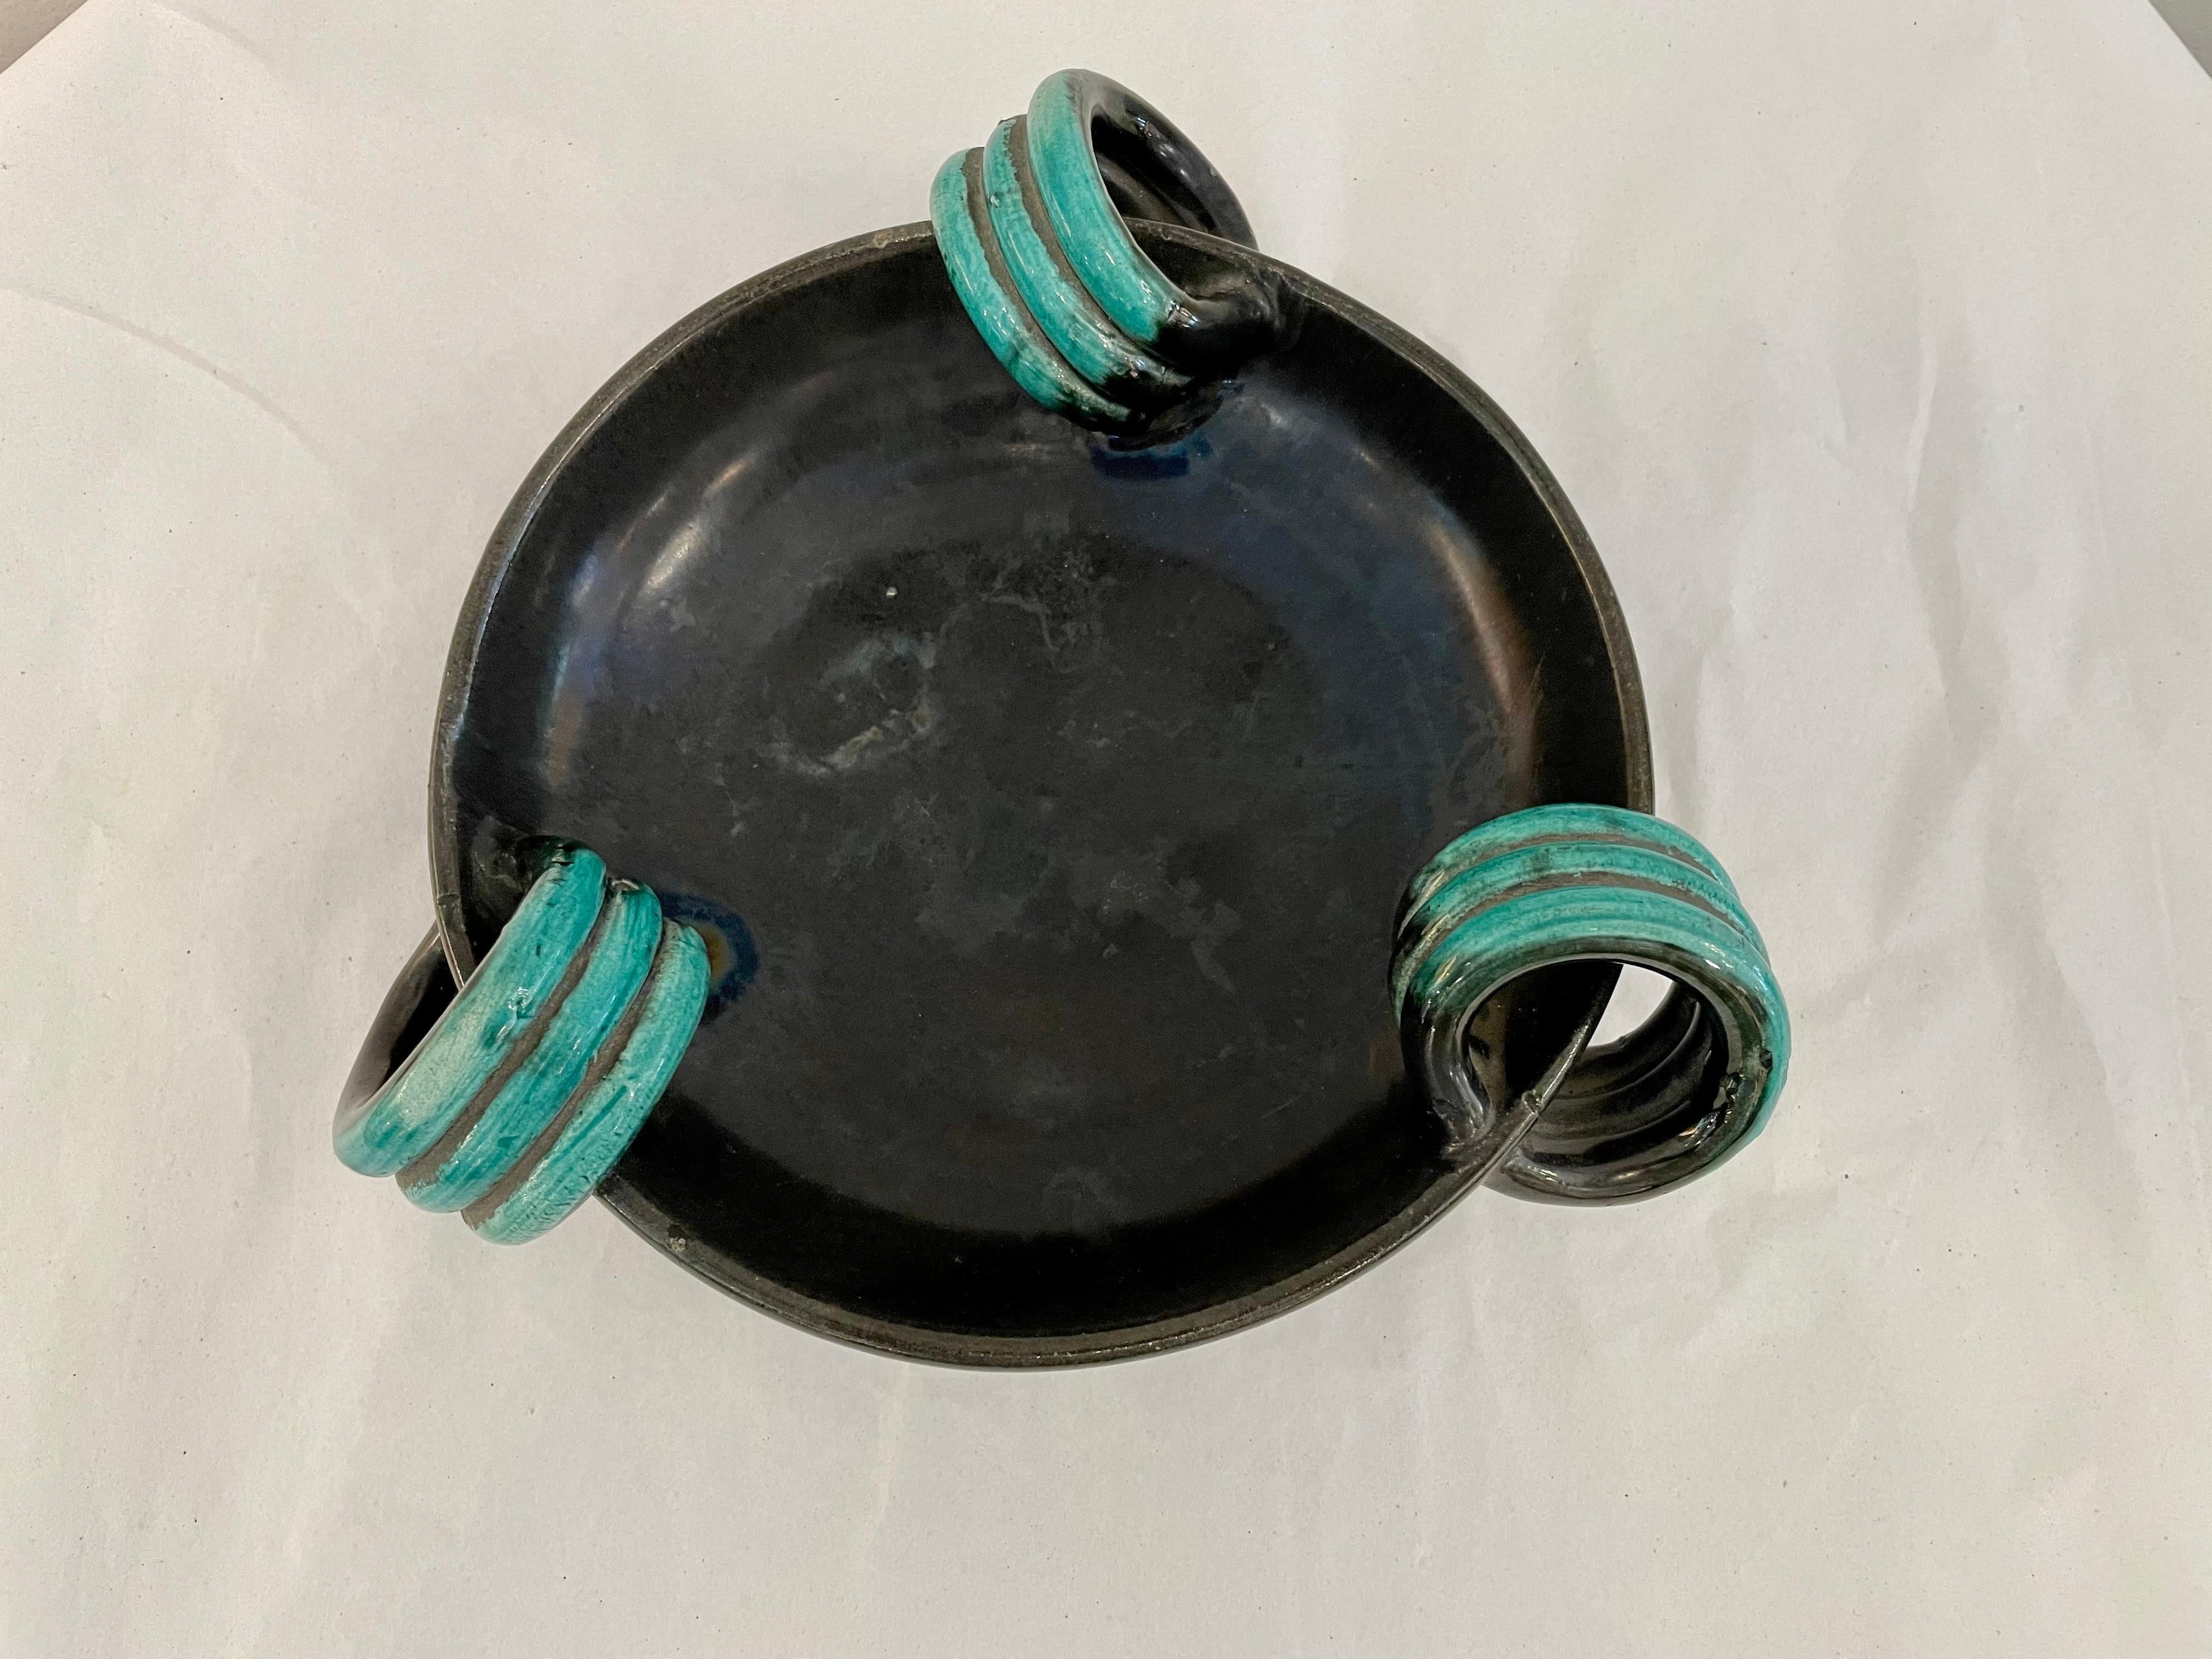 One of the prettiest cache-pot bowls, dishes, we have ever had, very reminiscent of Georges Jouve. Beautiful black ceramic and vivid green ringlet details. Signed to bottom, but difficult to determine maker - acquired in France.